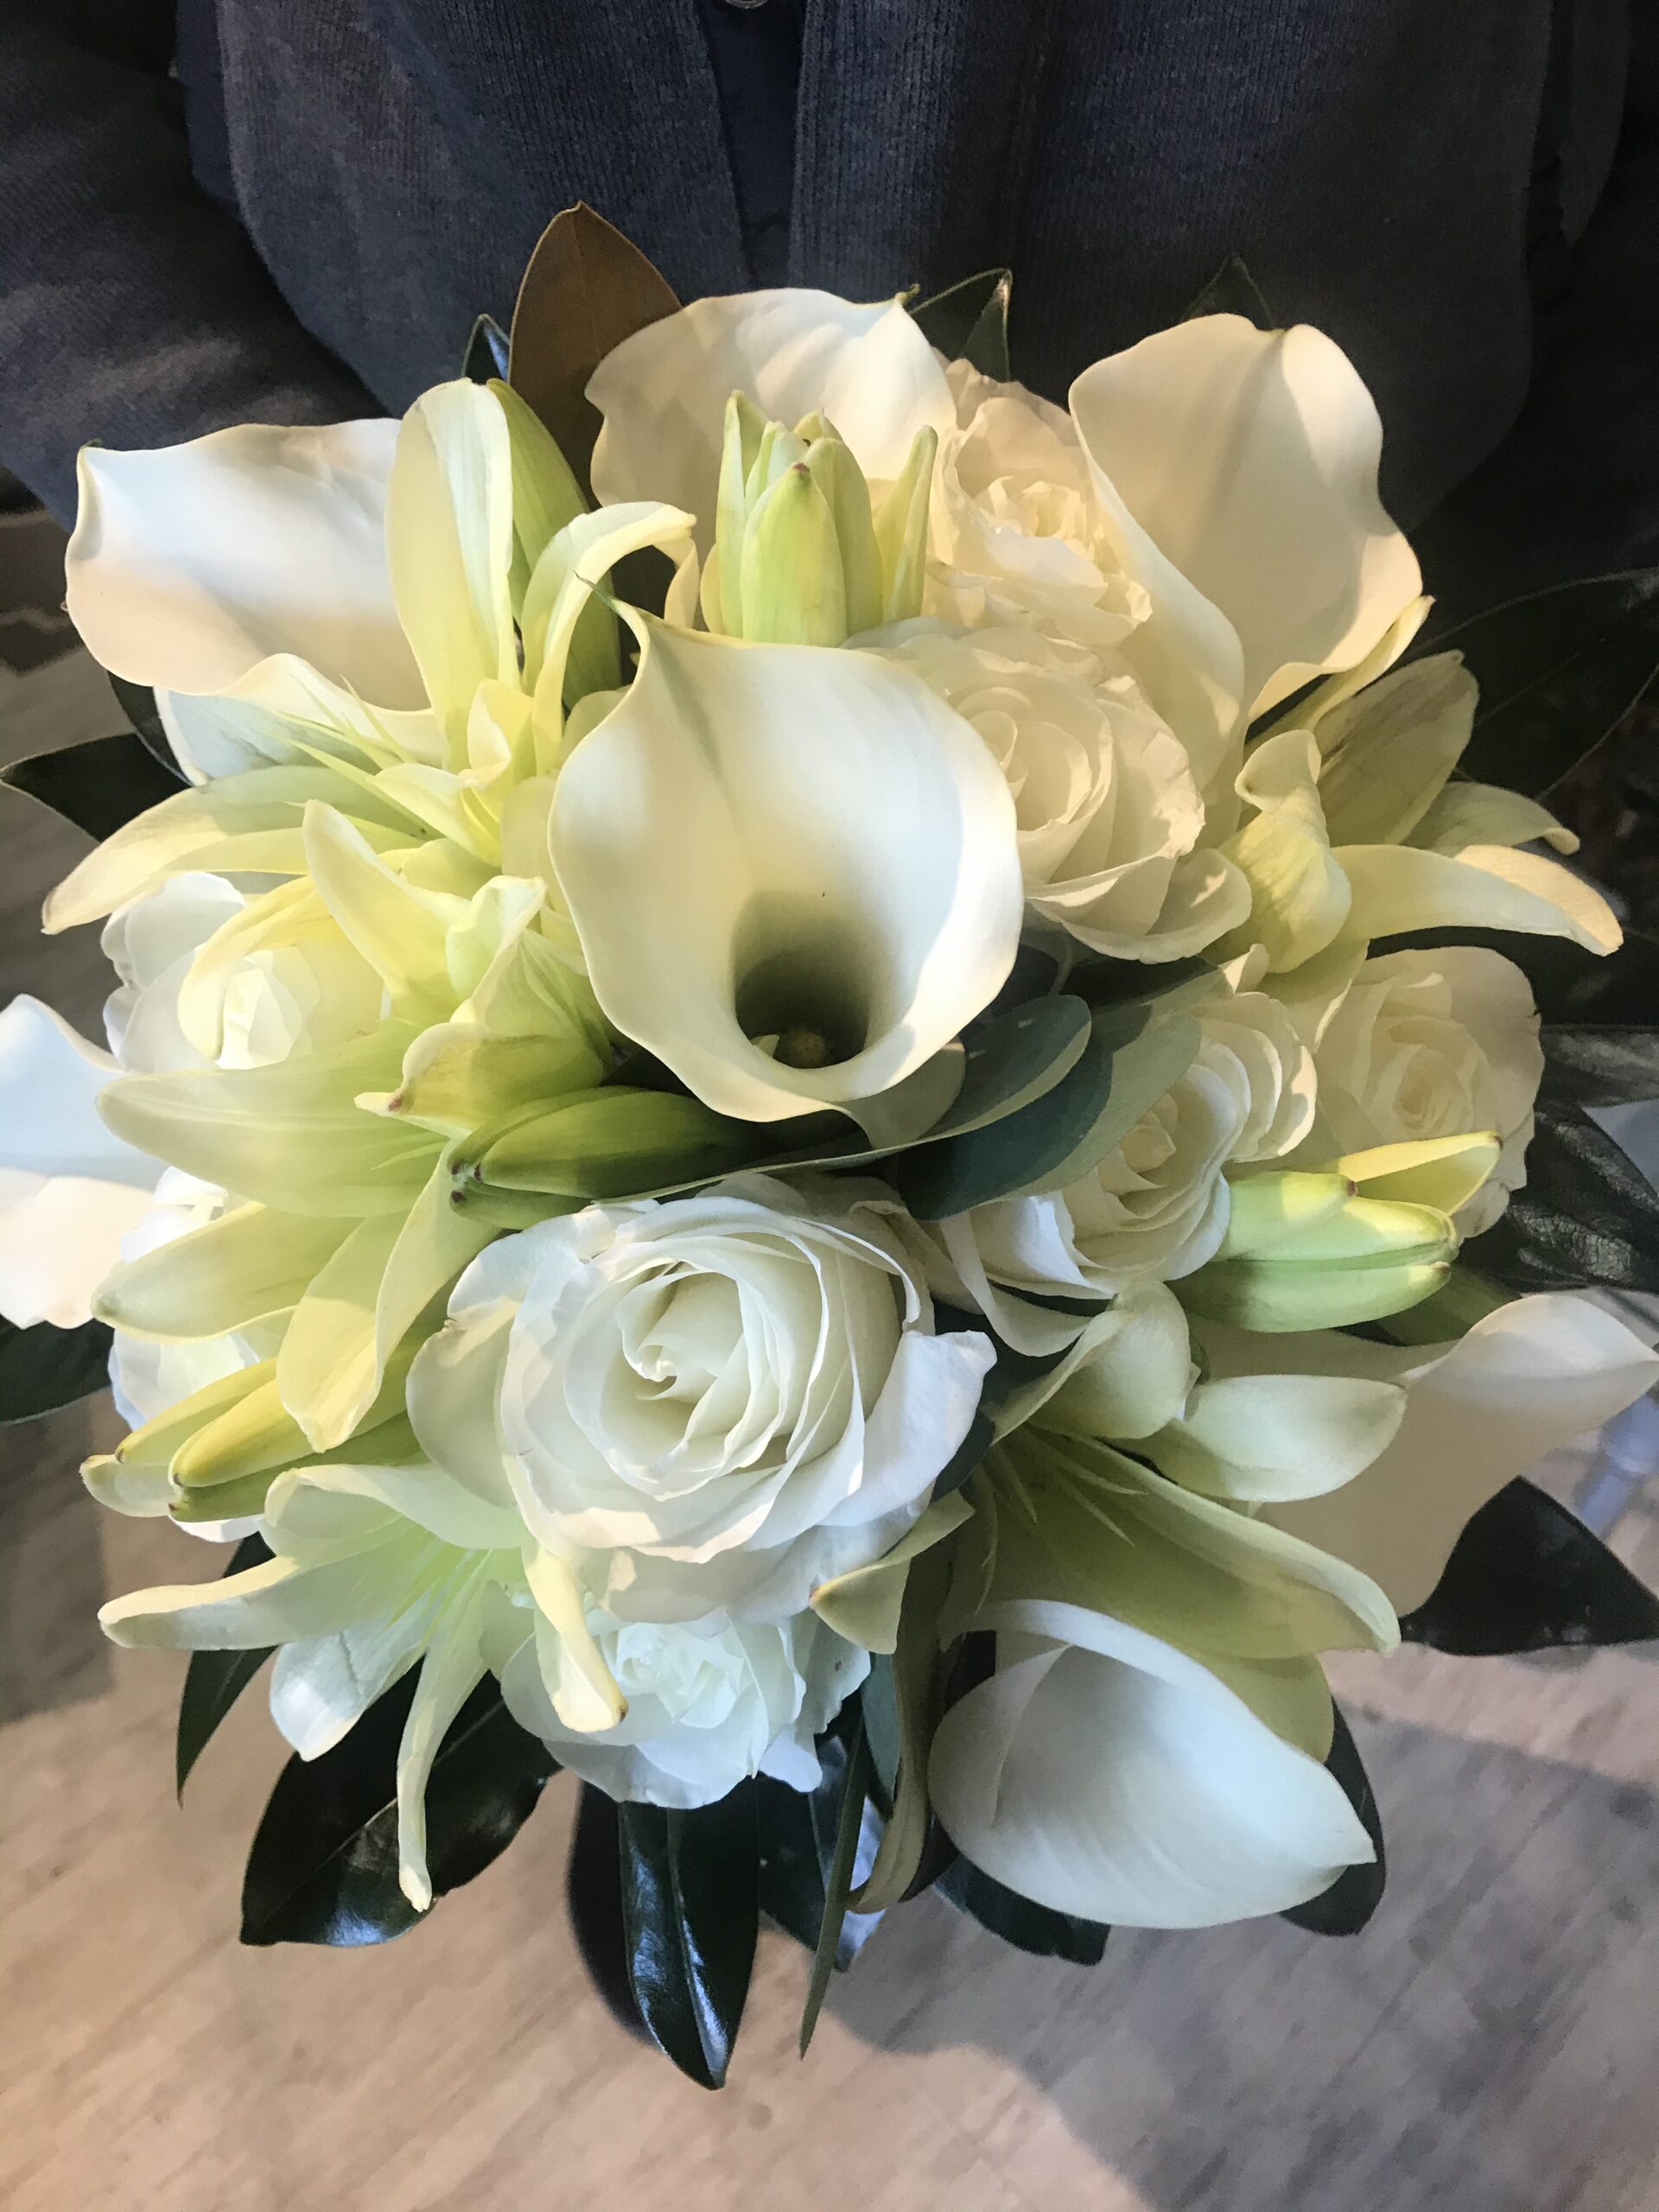 A bouquet of white flowers in a vase.